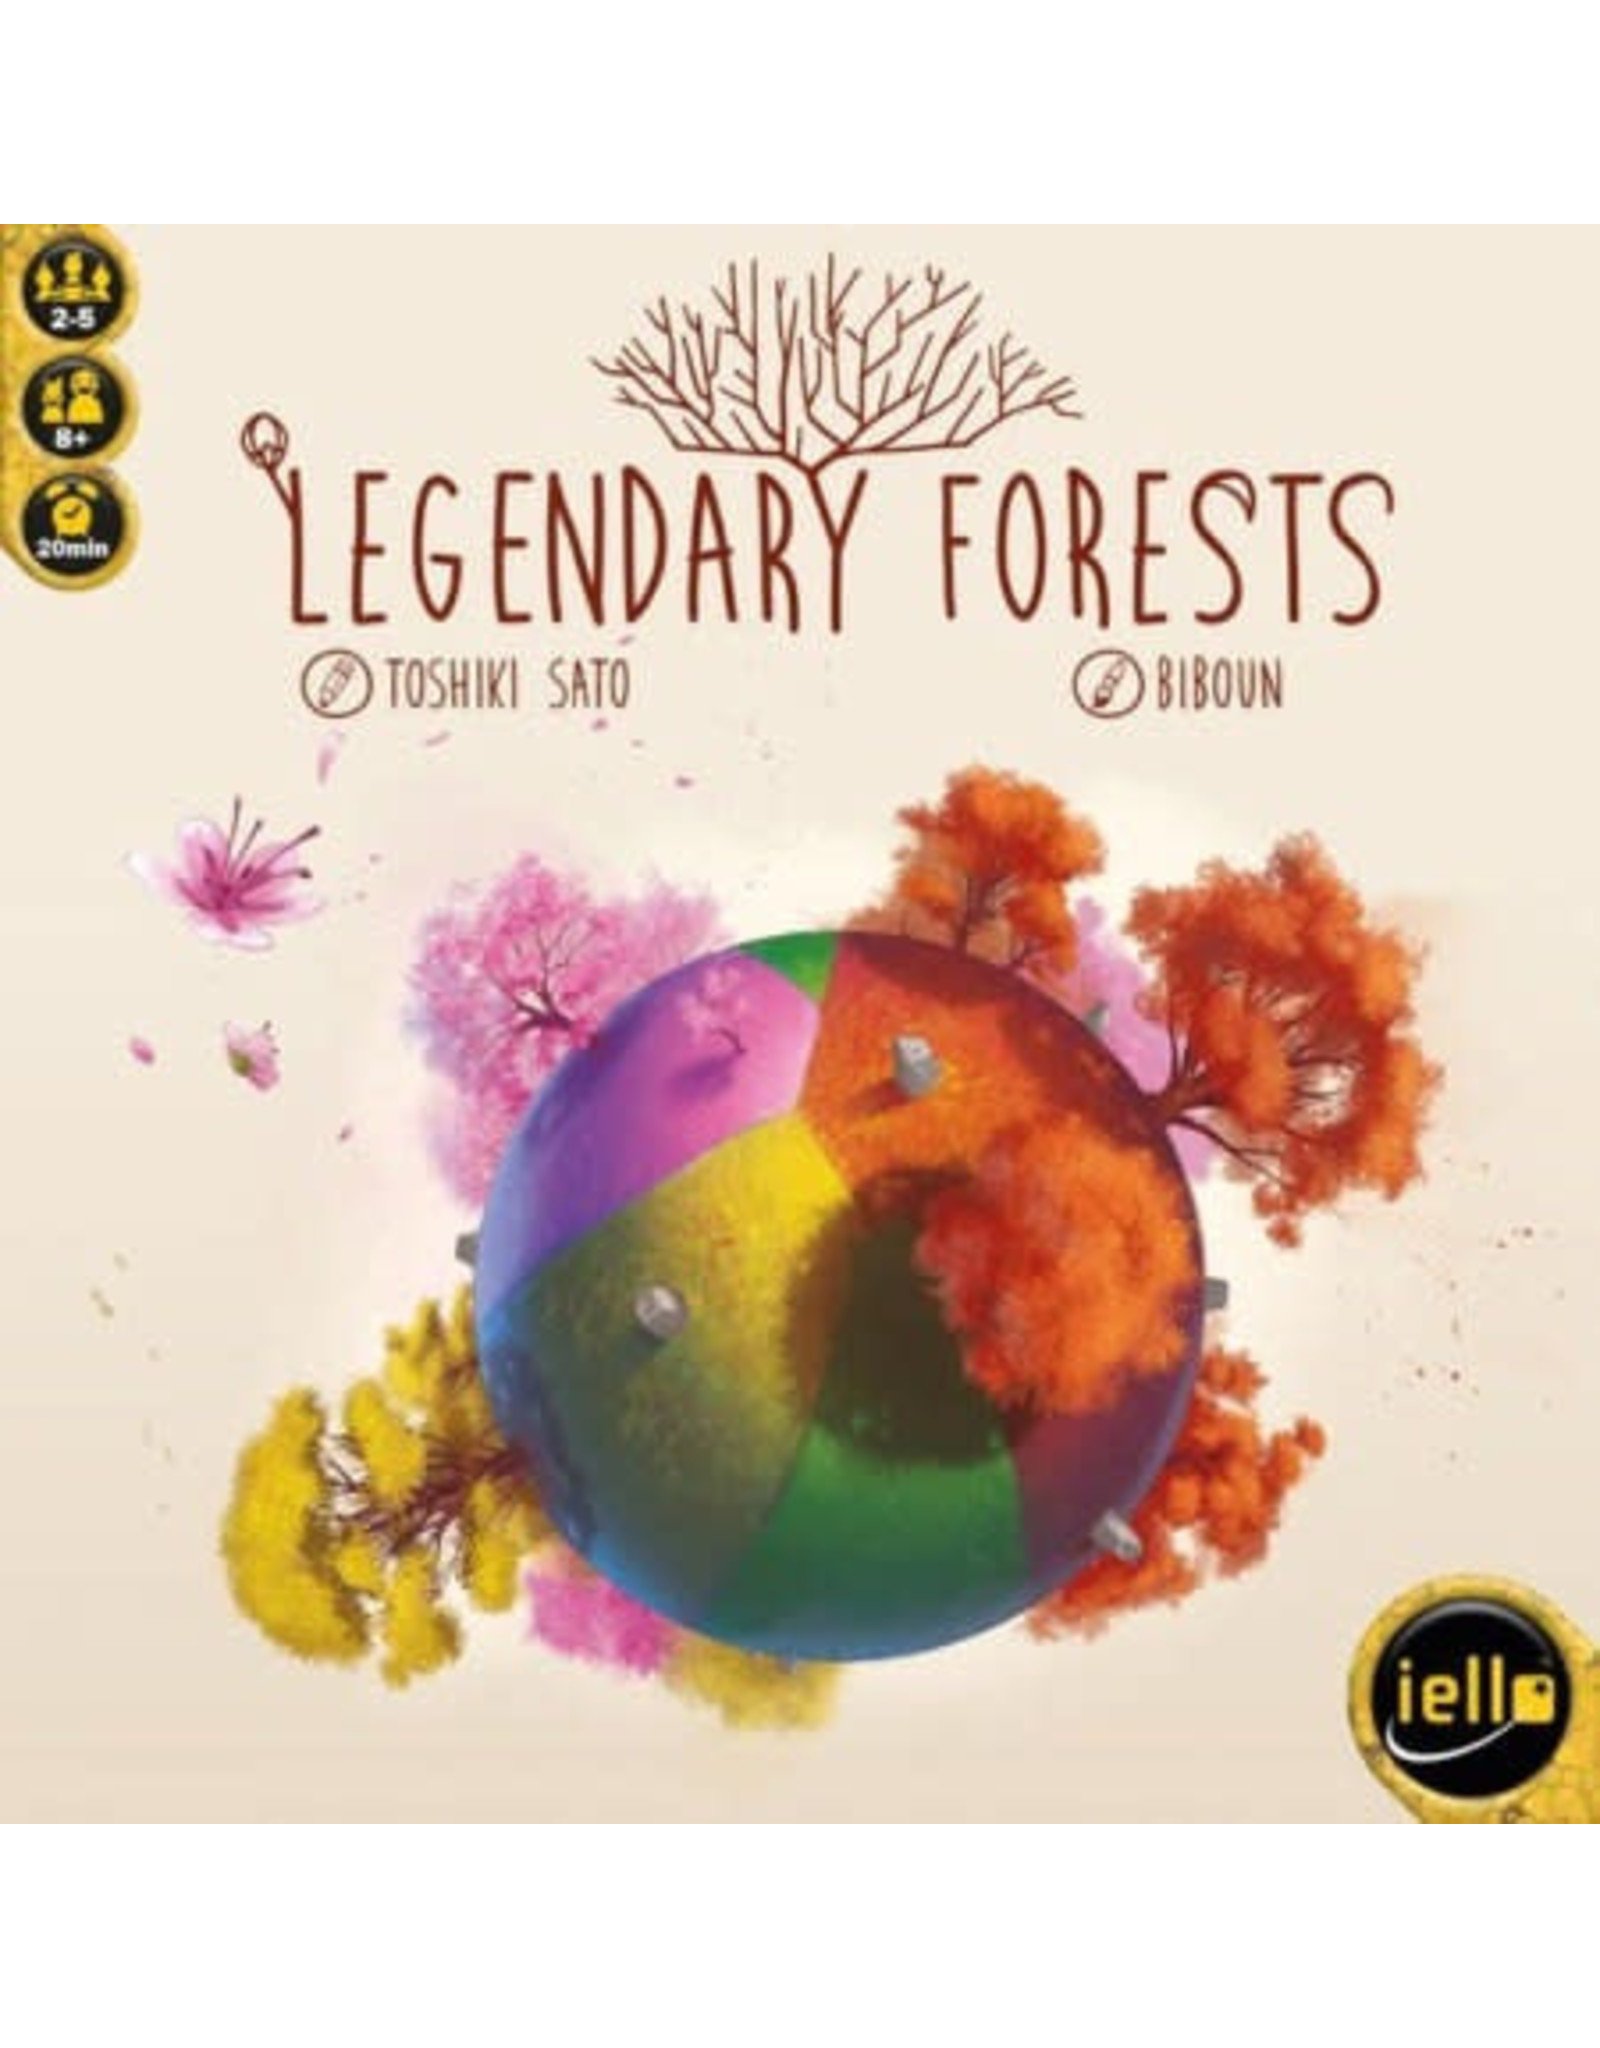 iello Legendary Forests